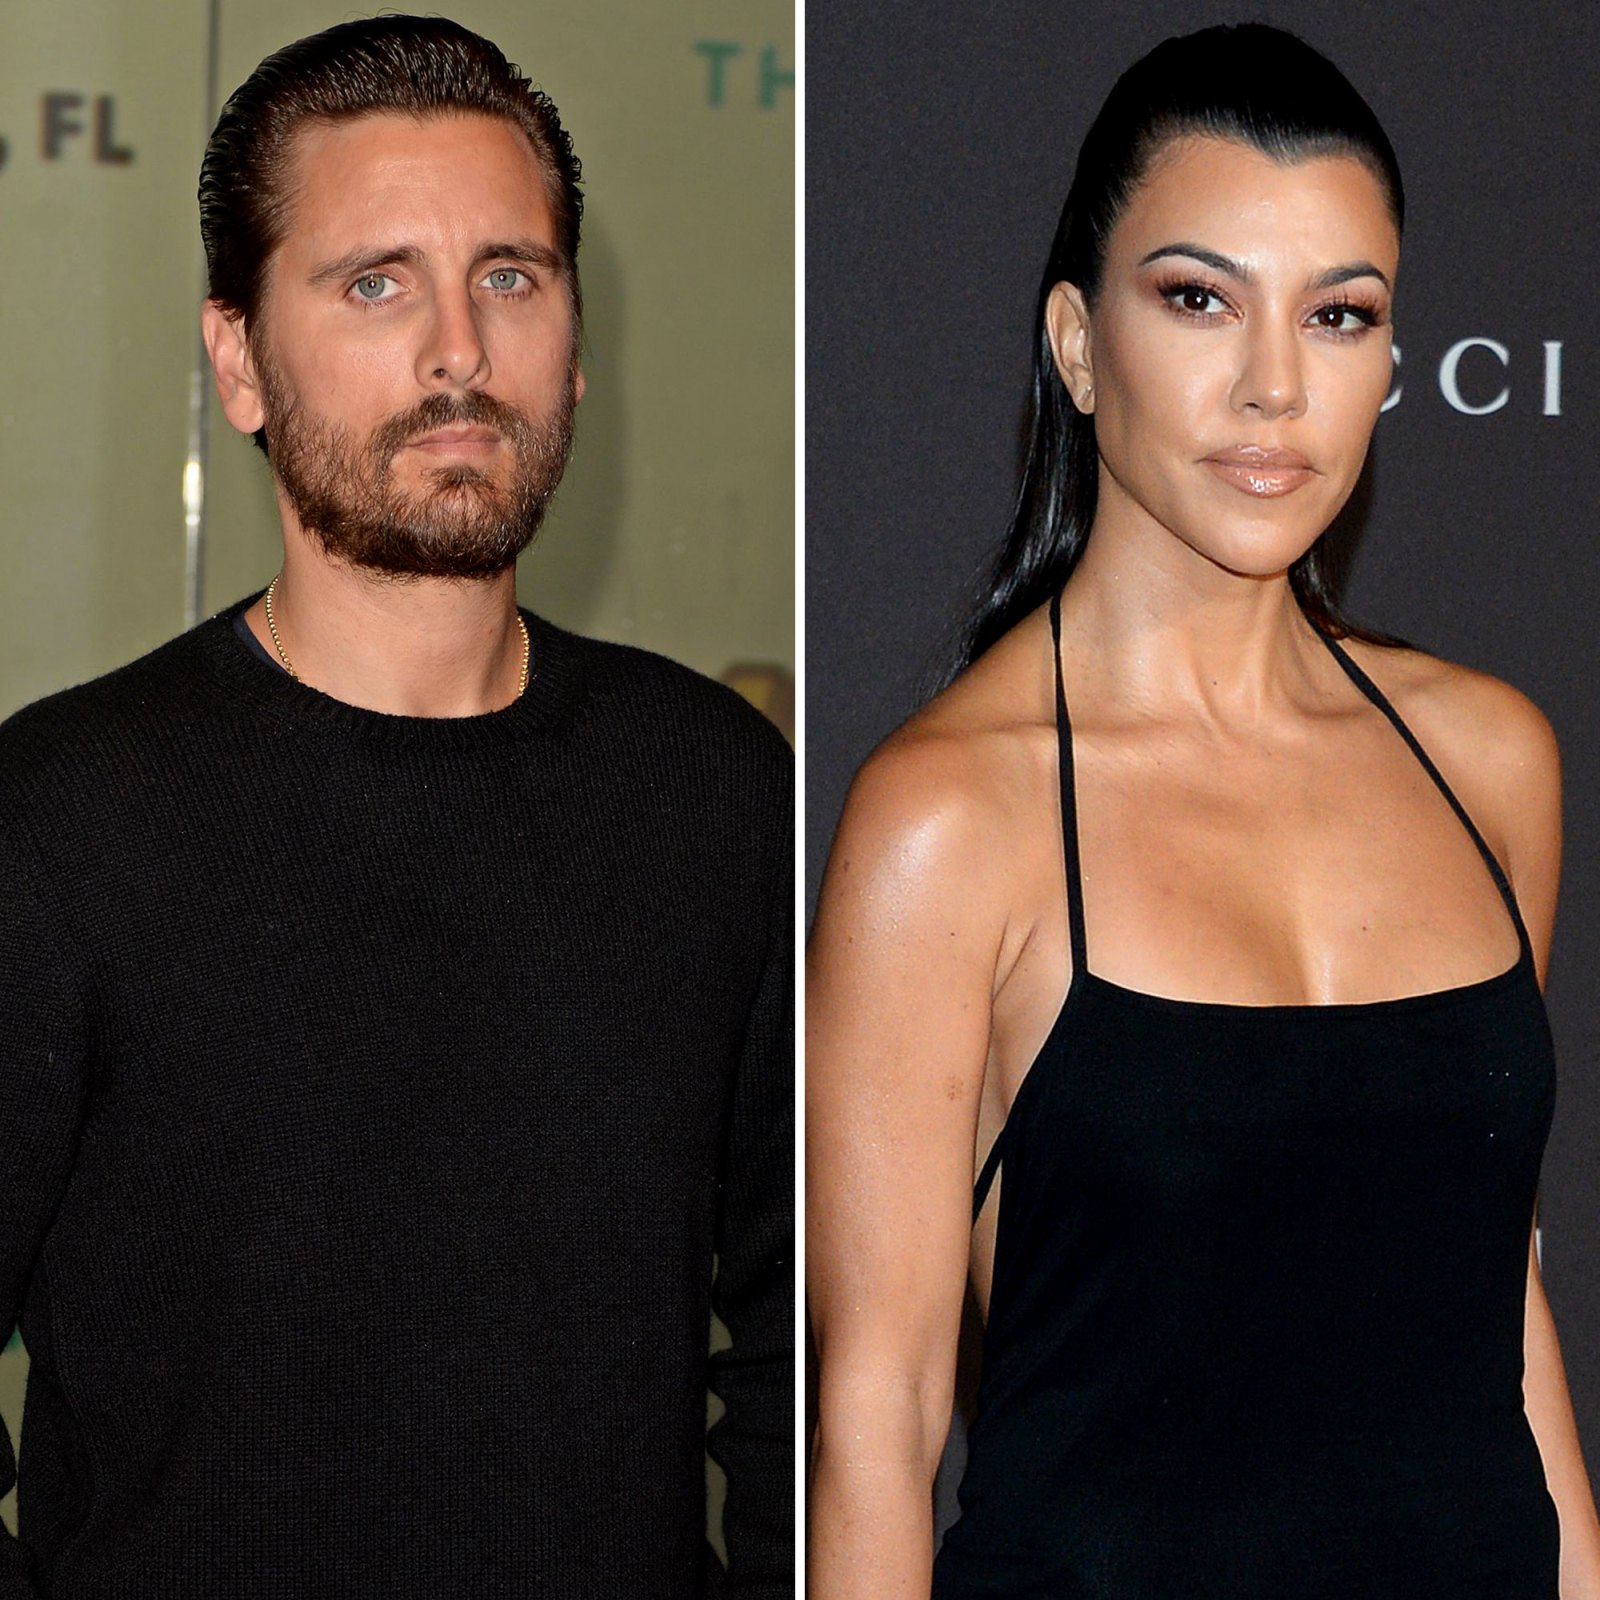 Scott Disick Parties in Miami on July 4th While Kourtney Hangs With Kids